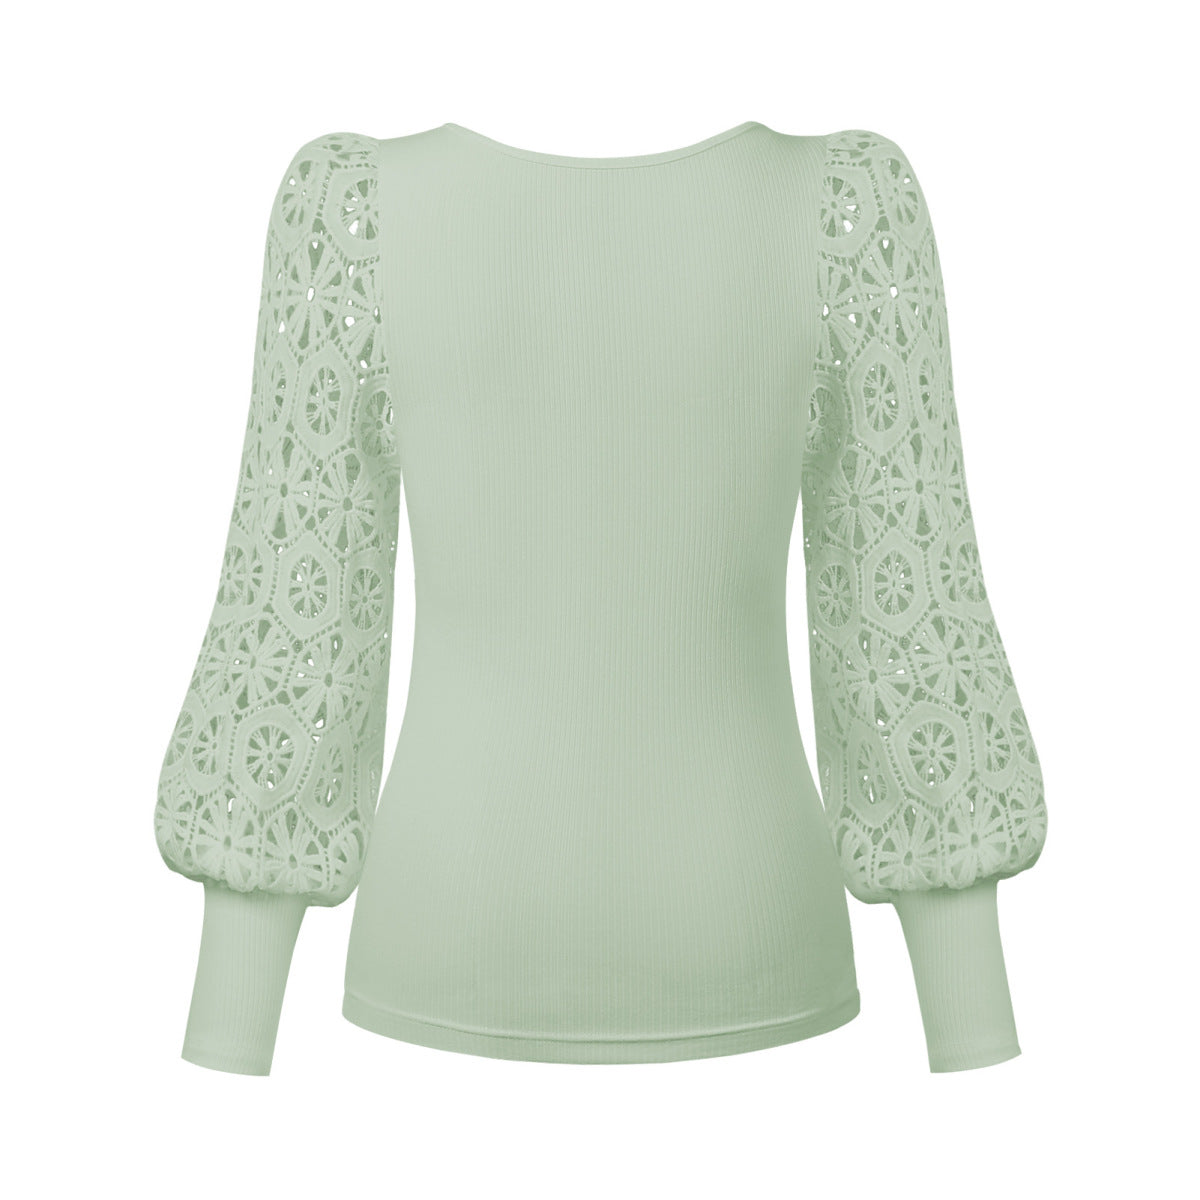 Solid Openwork Lace Ballon Sleeve Top